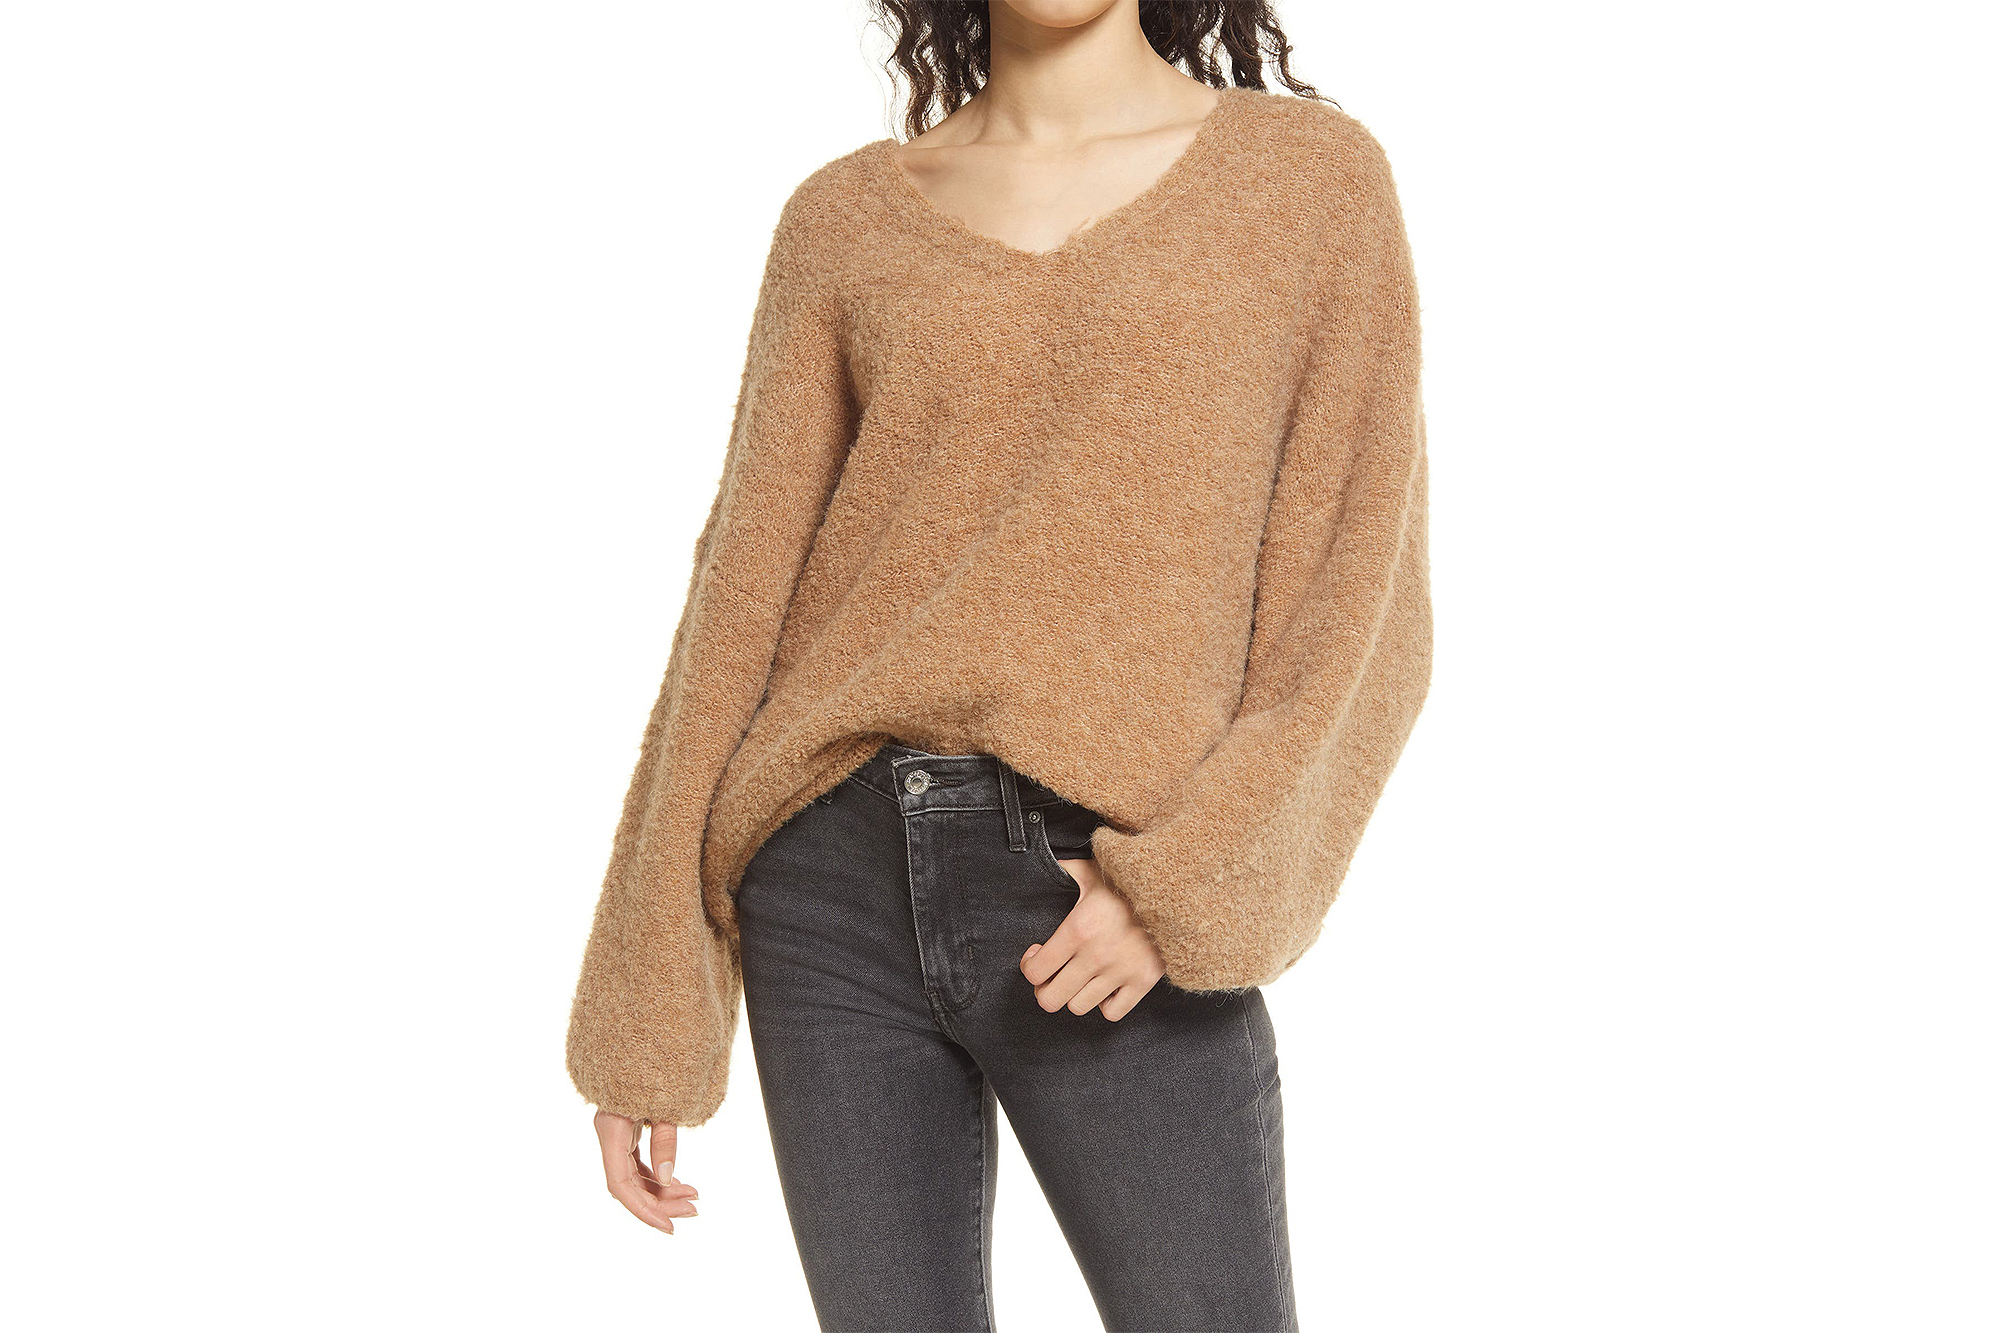 Moda Sweater Is the Winter You Won't Want to Off